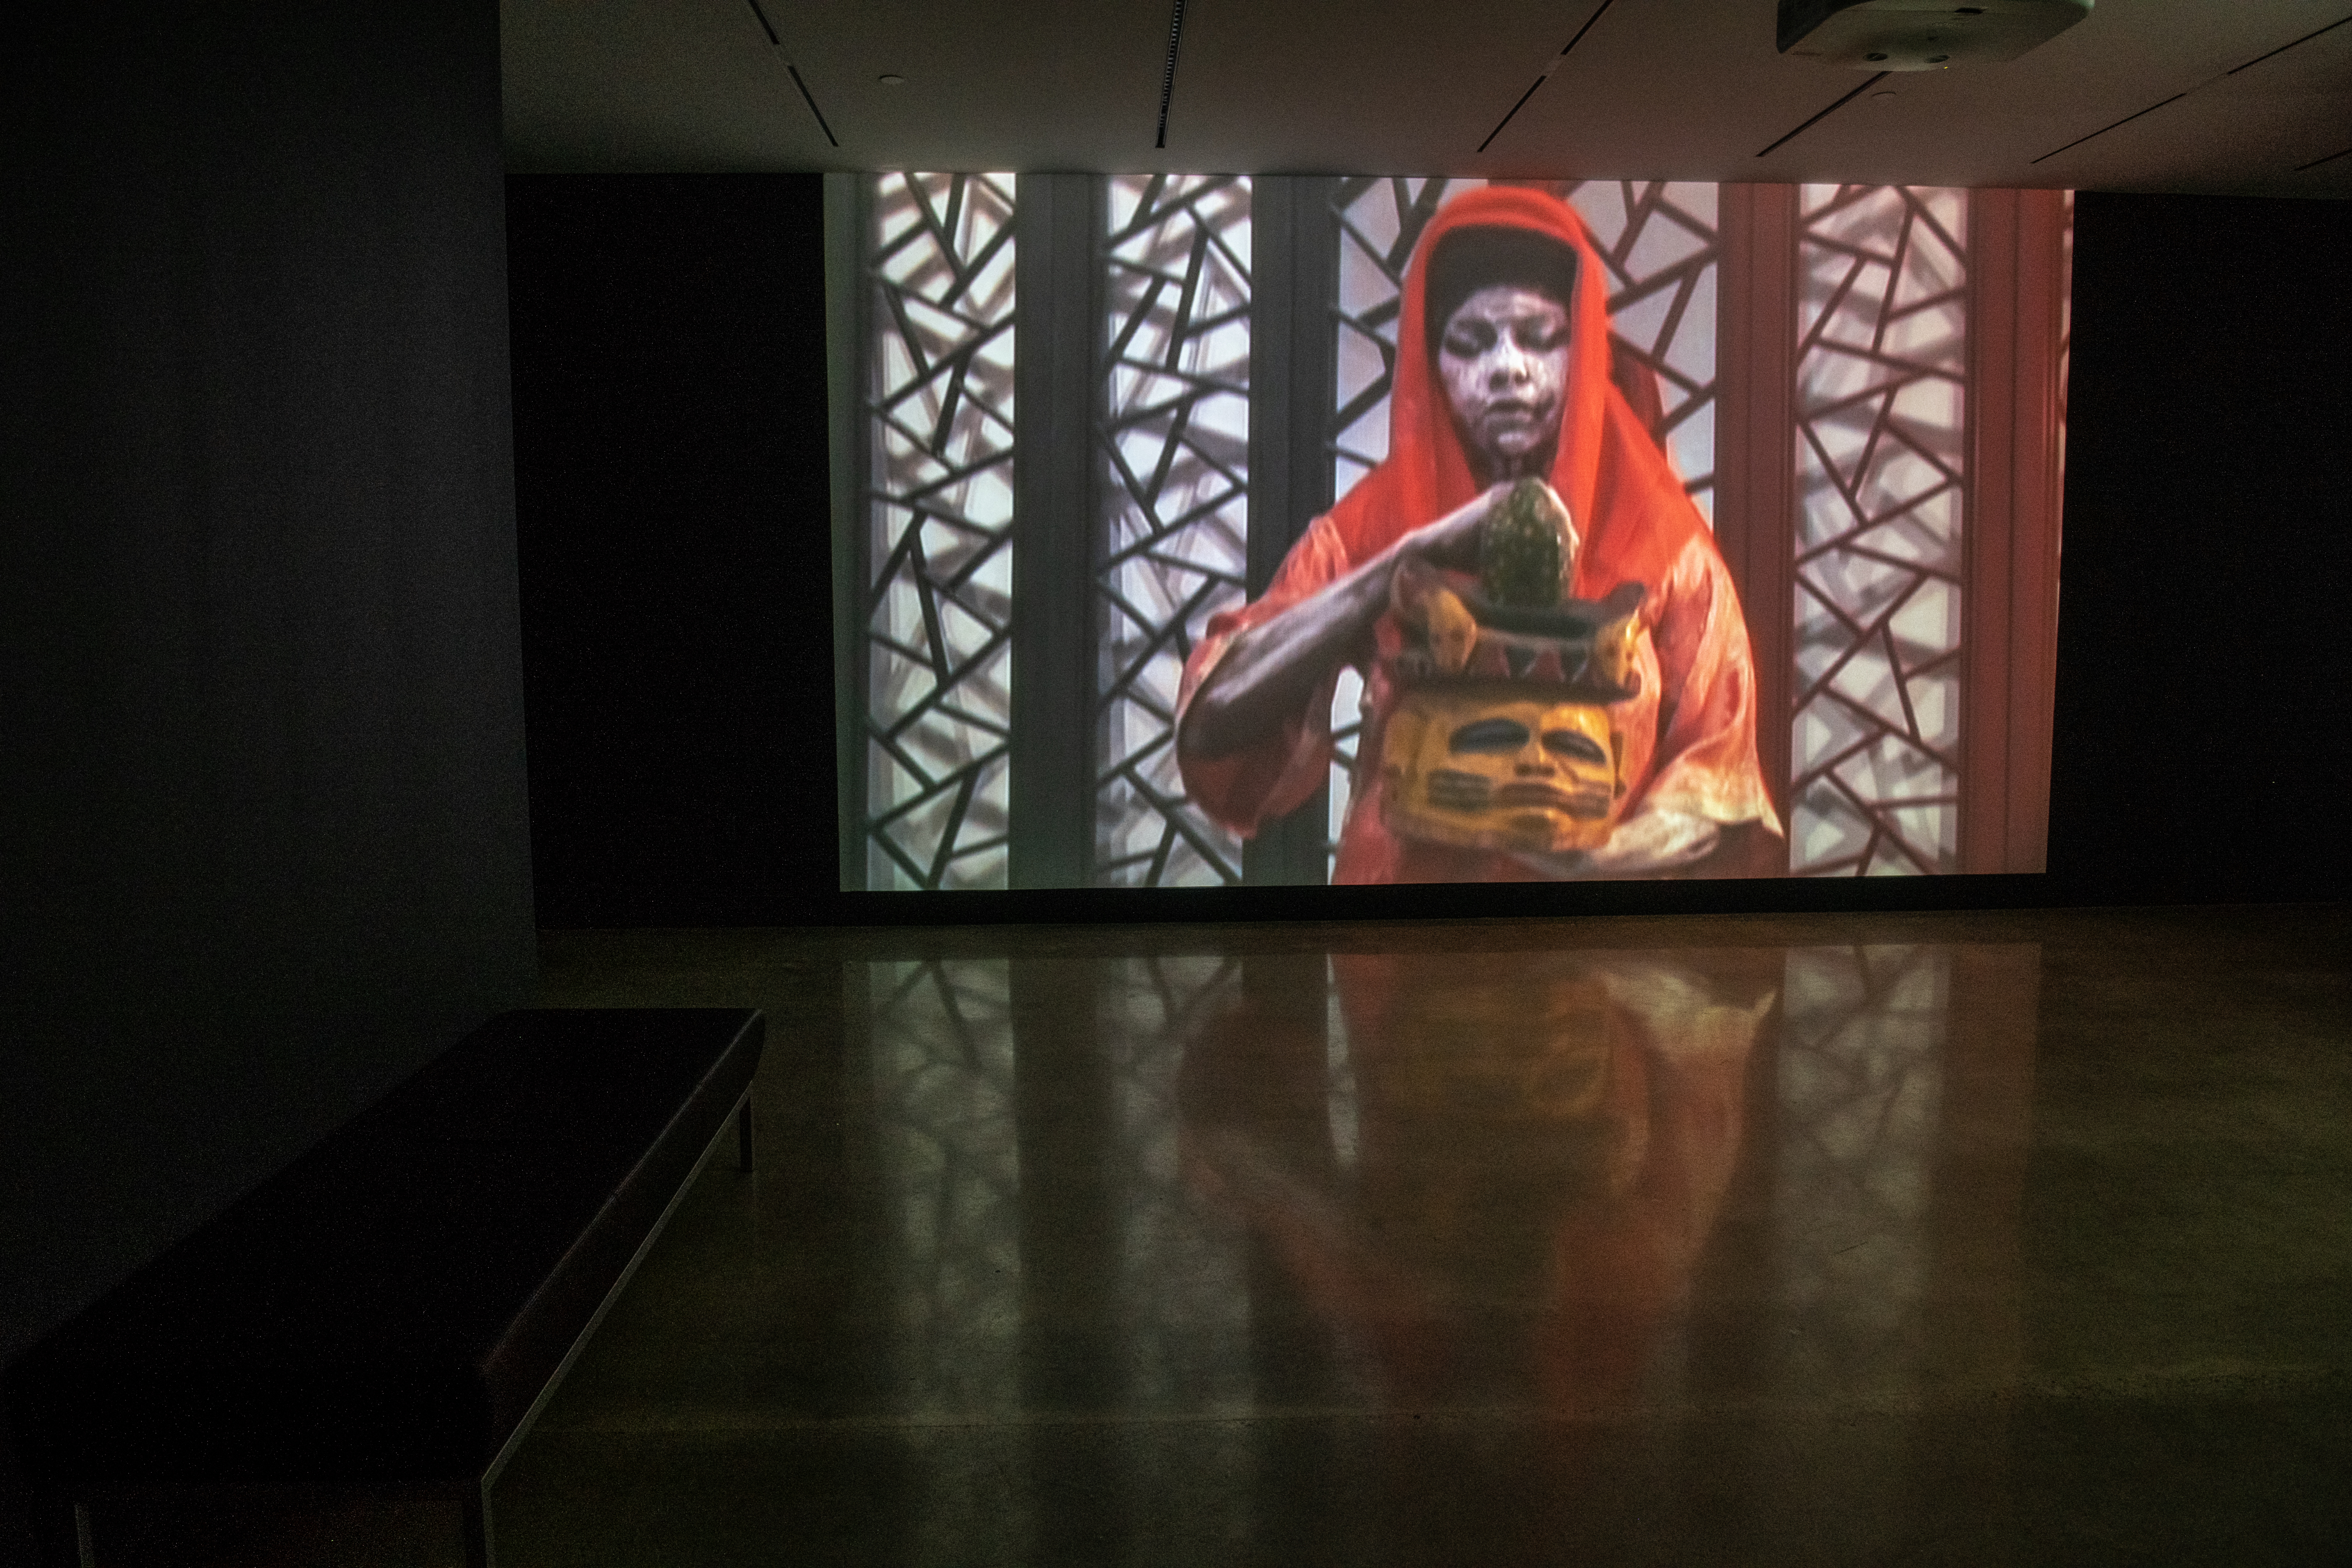 Galerie Barbara Thumm \ Like the lonely traveler: Video Works by María Magdalena Campos-Pons